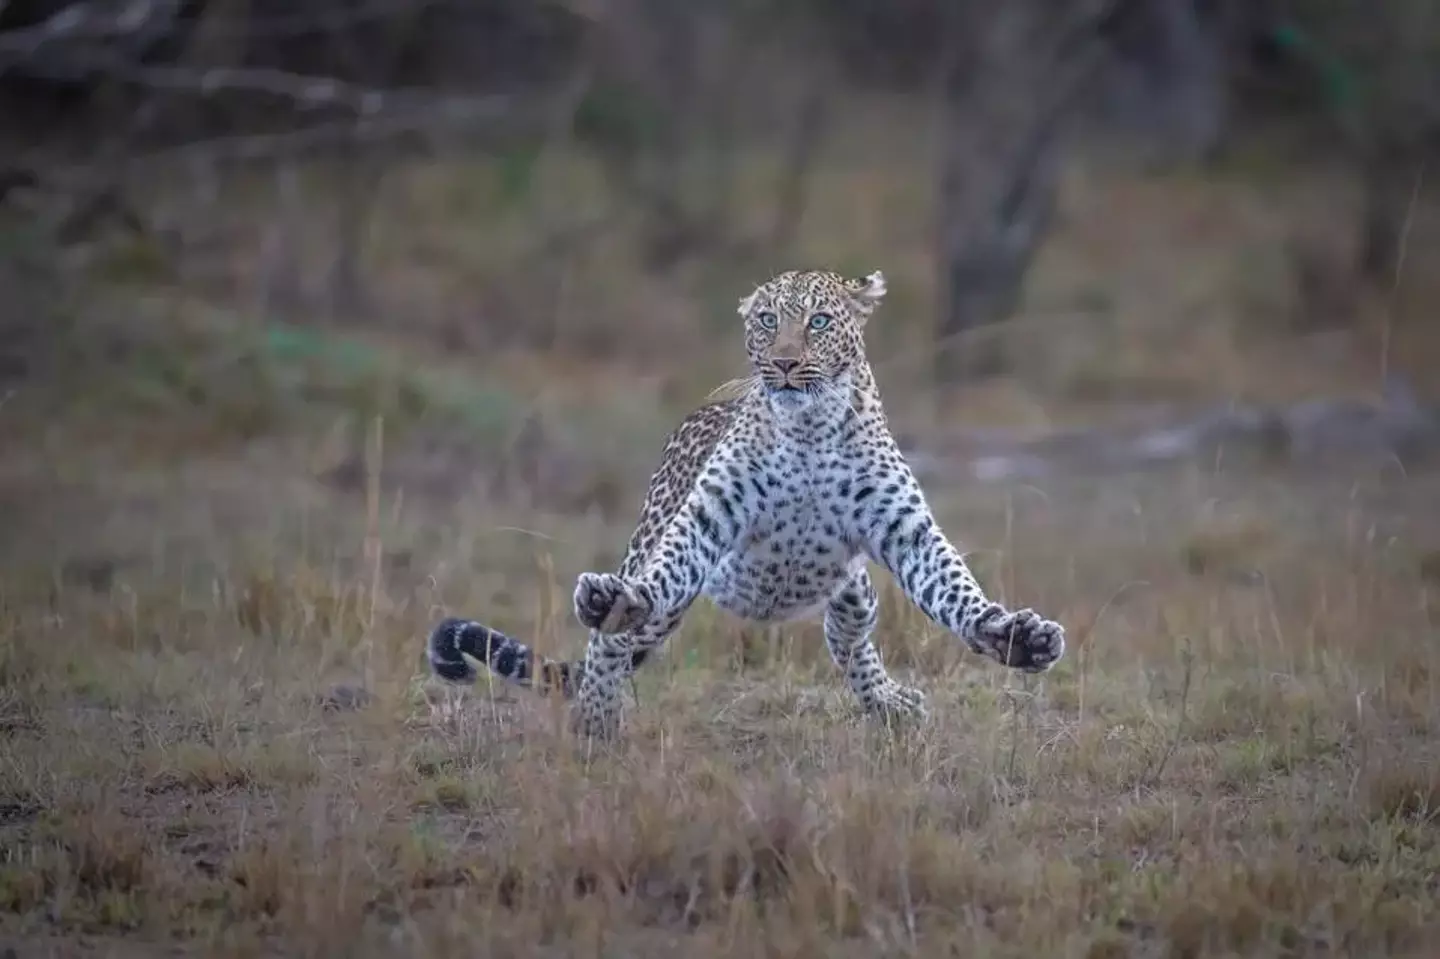 Something startled this leopard.